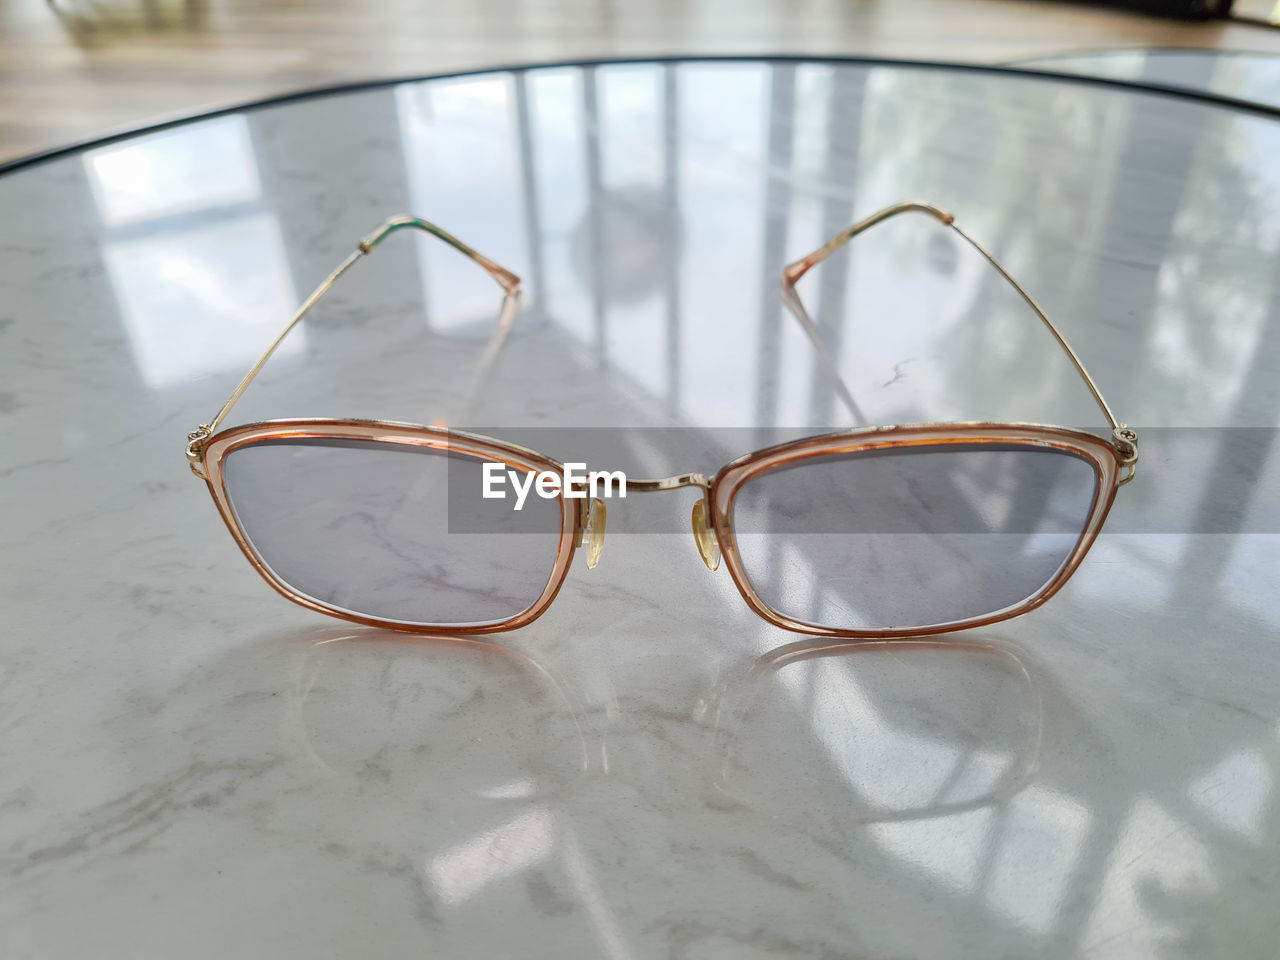 CLOSE-UP OF EYEGLASSES ON TABLE